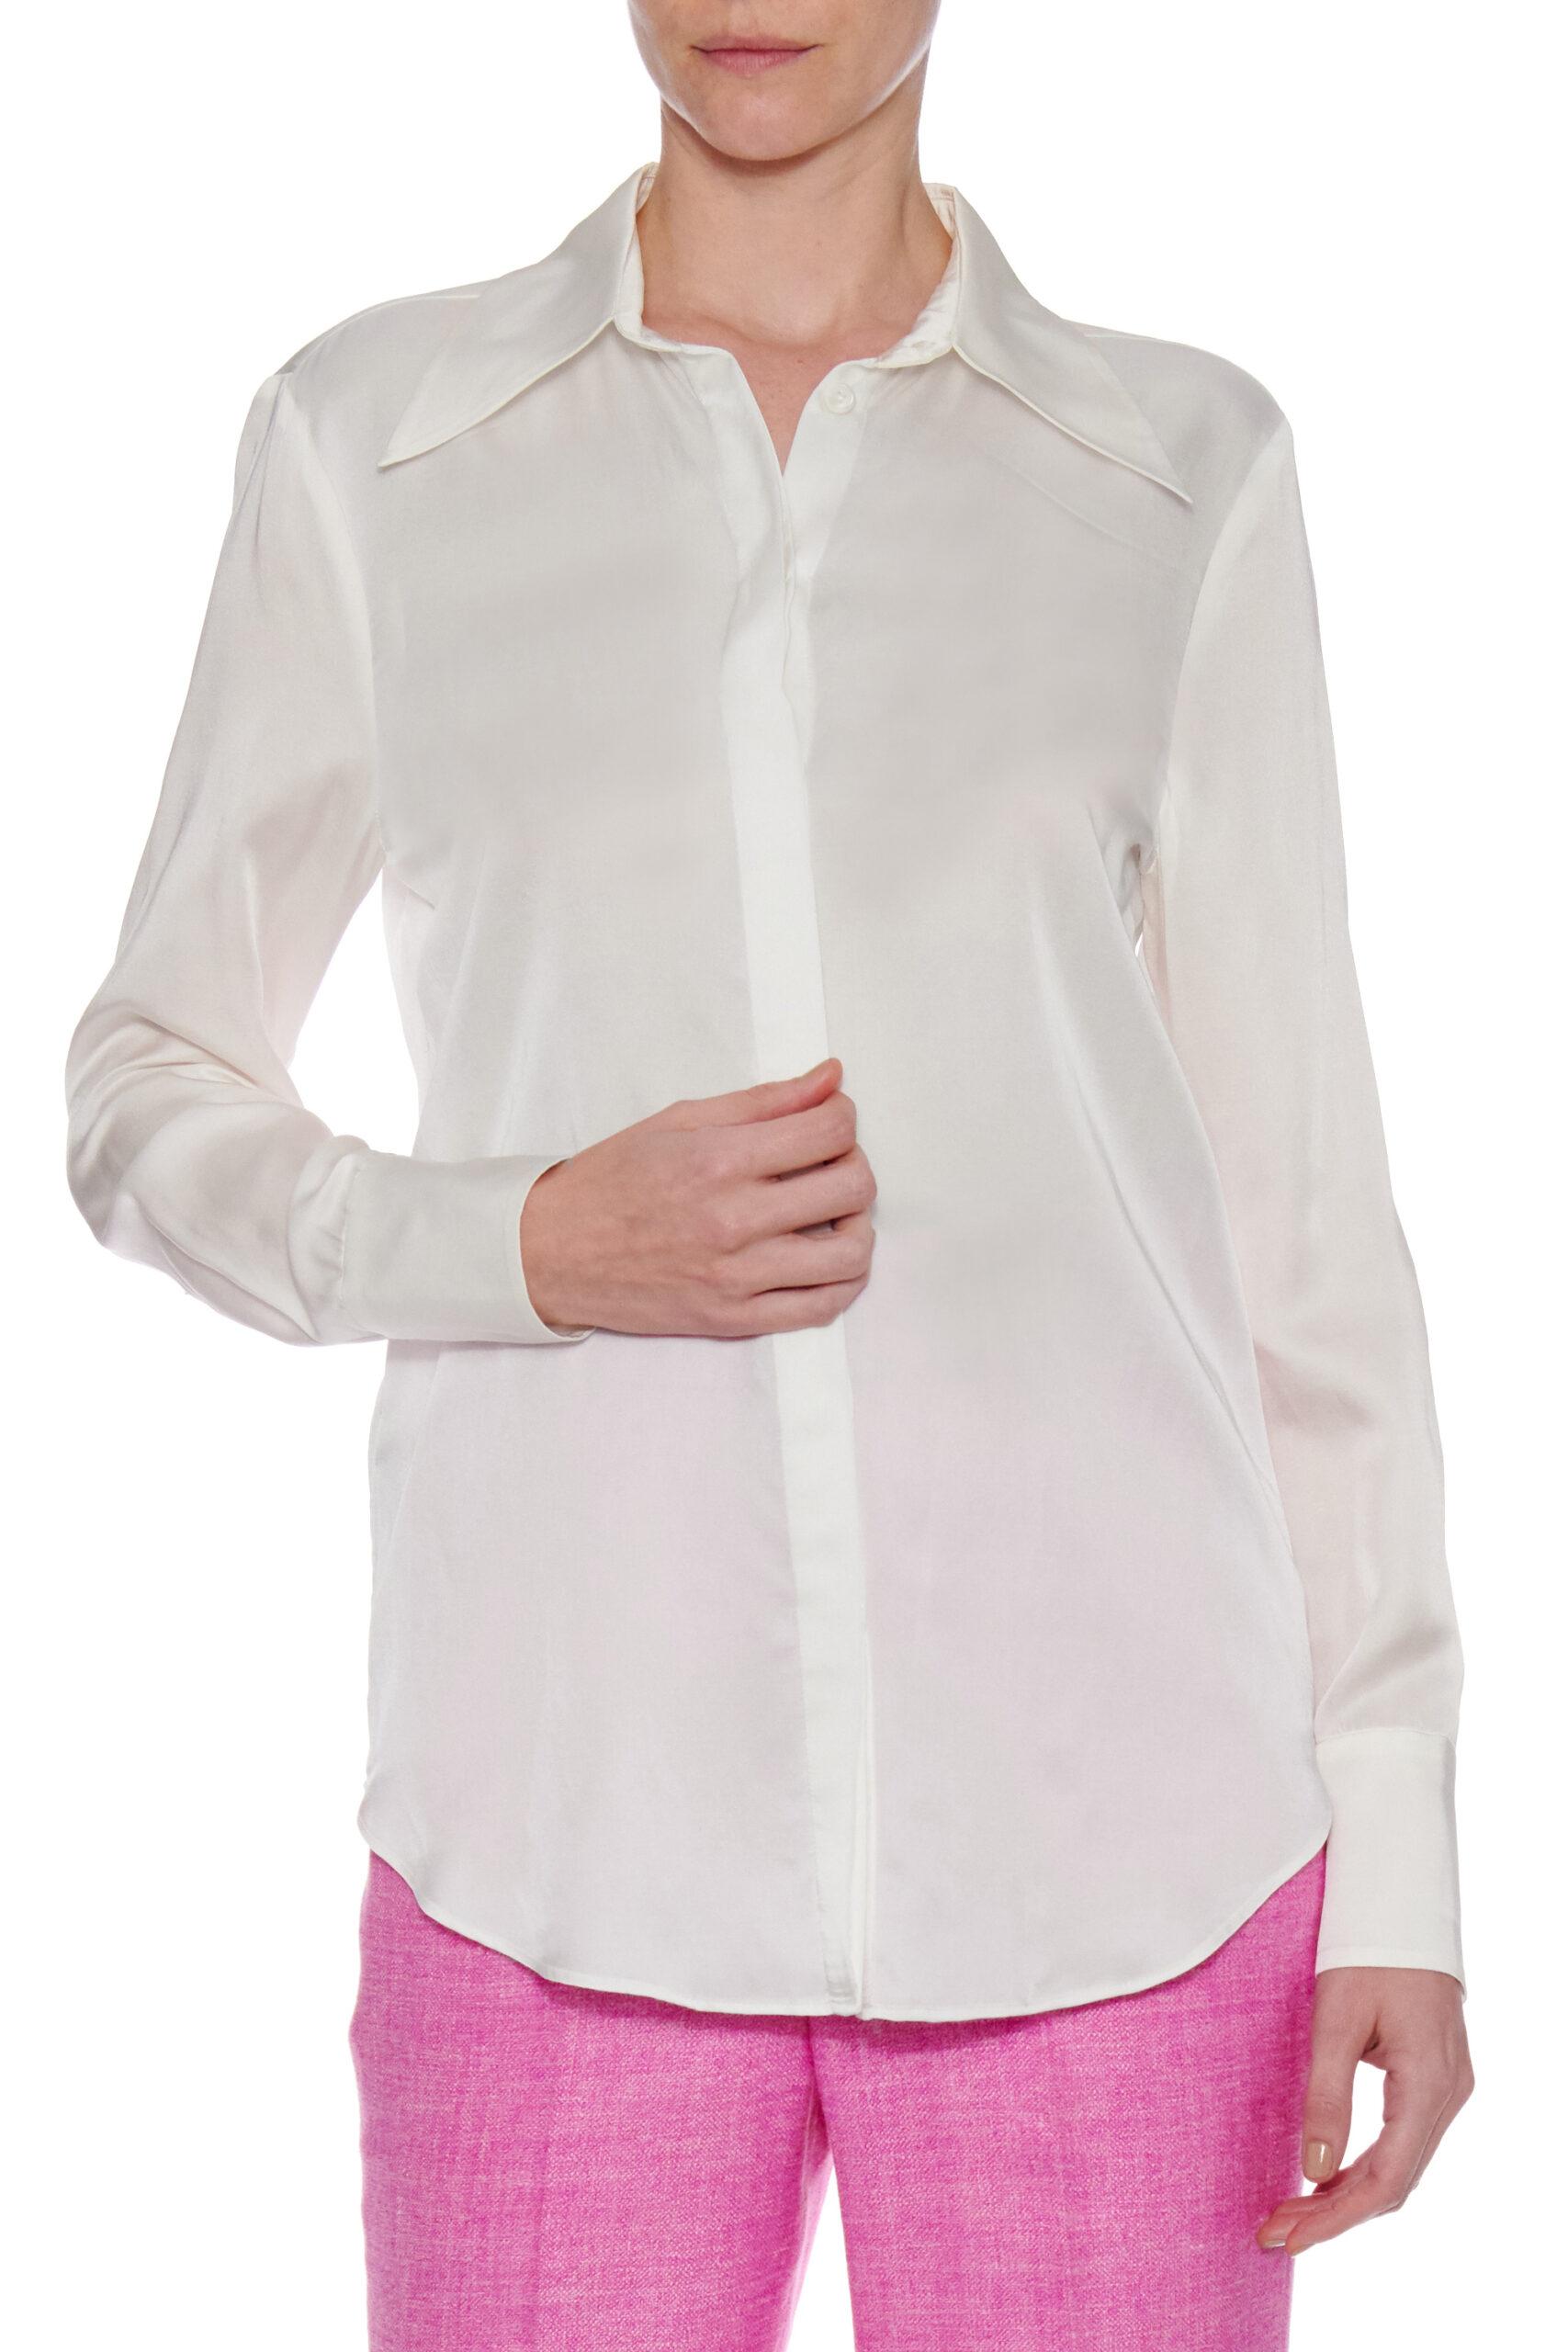 Montrieul Shirt – Button-down long sleeve blouse in white